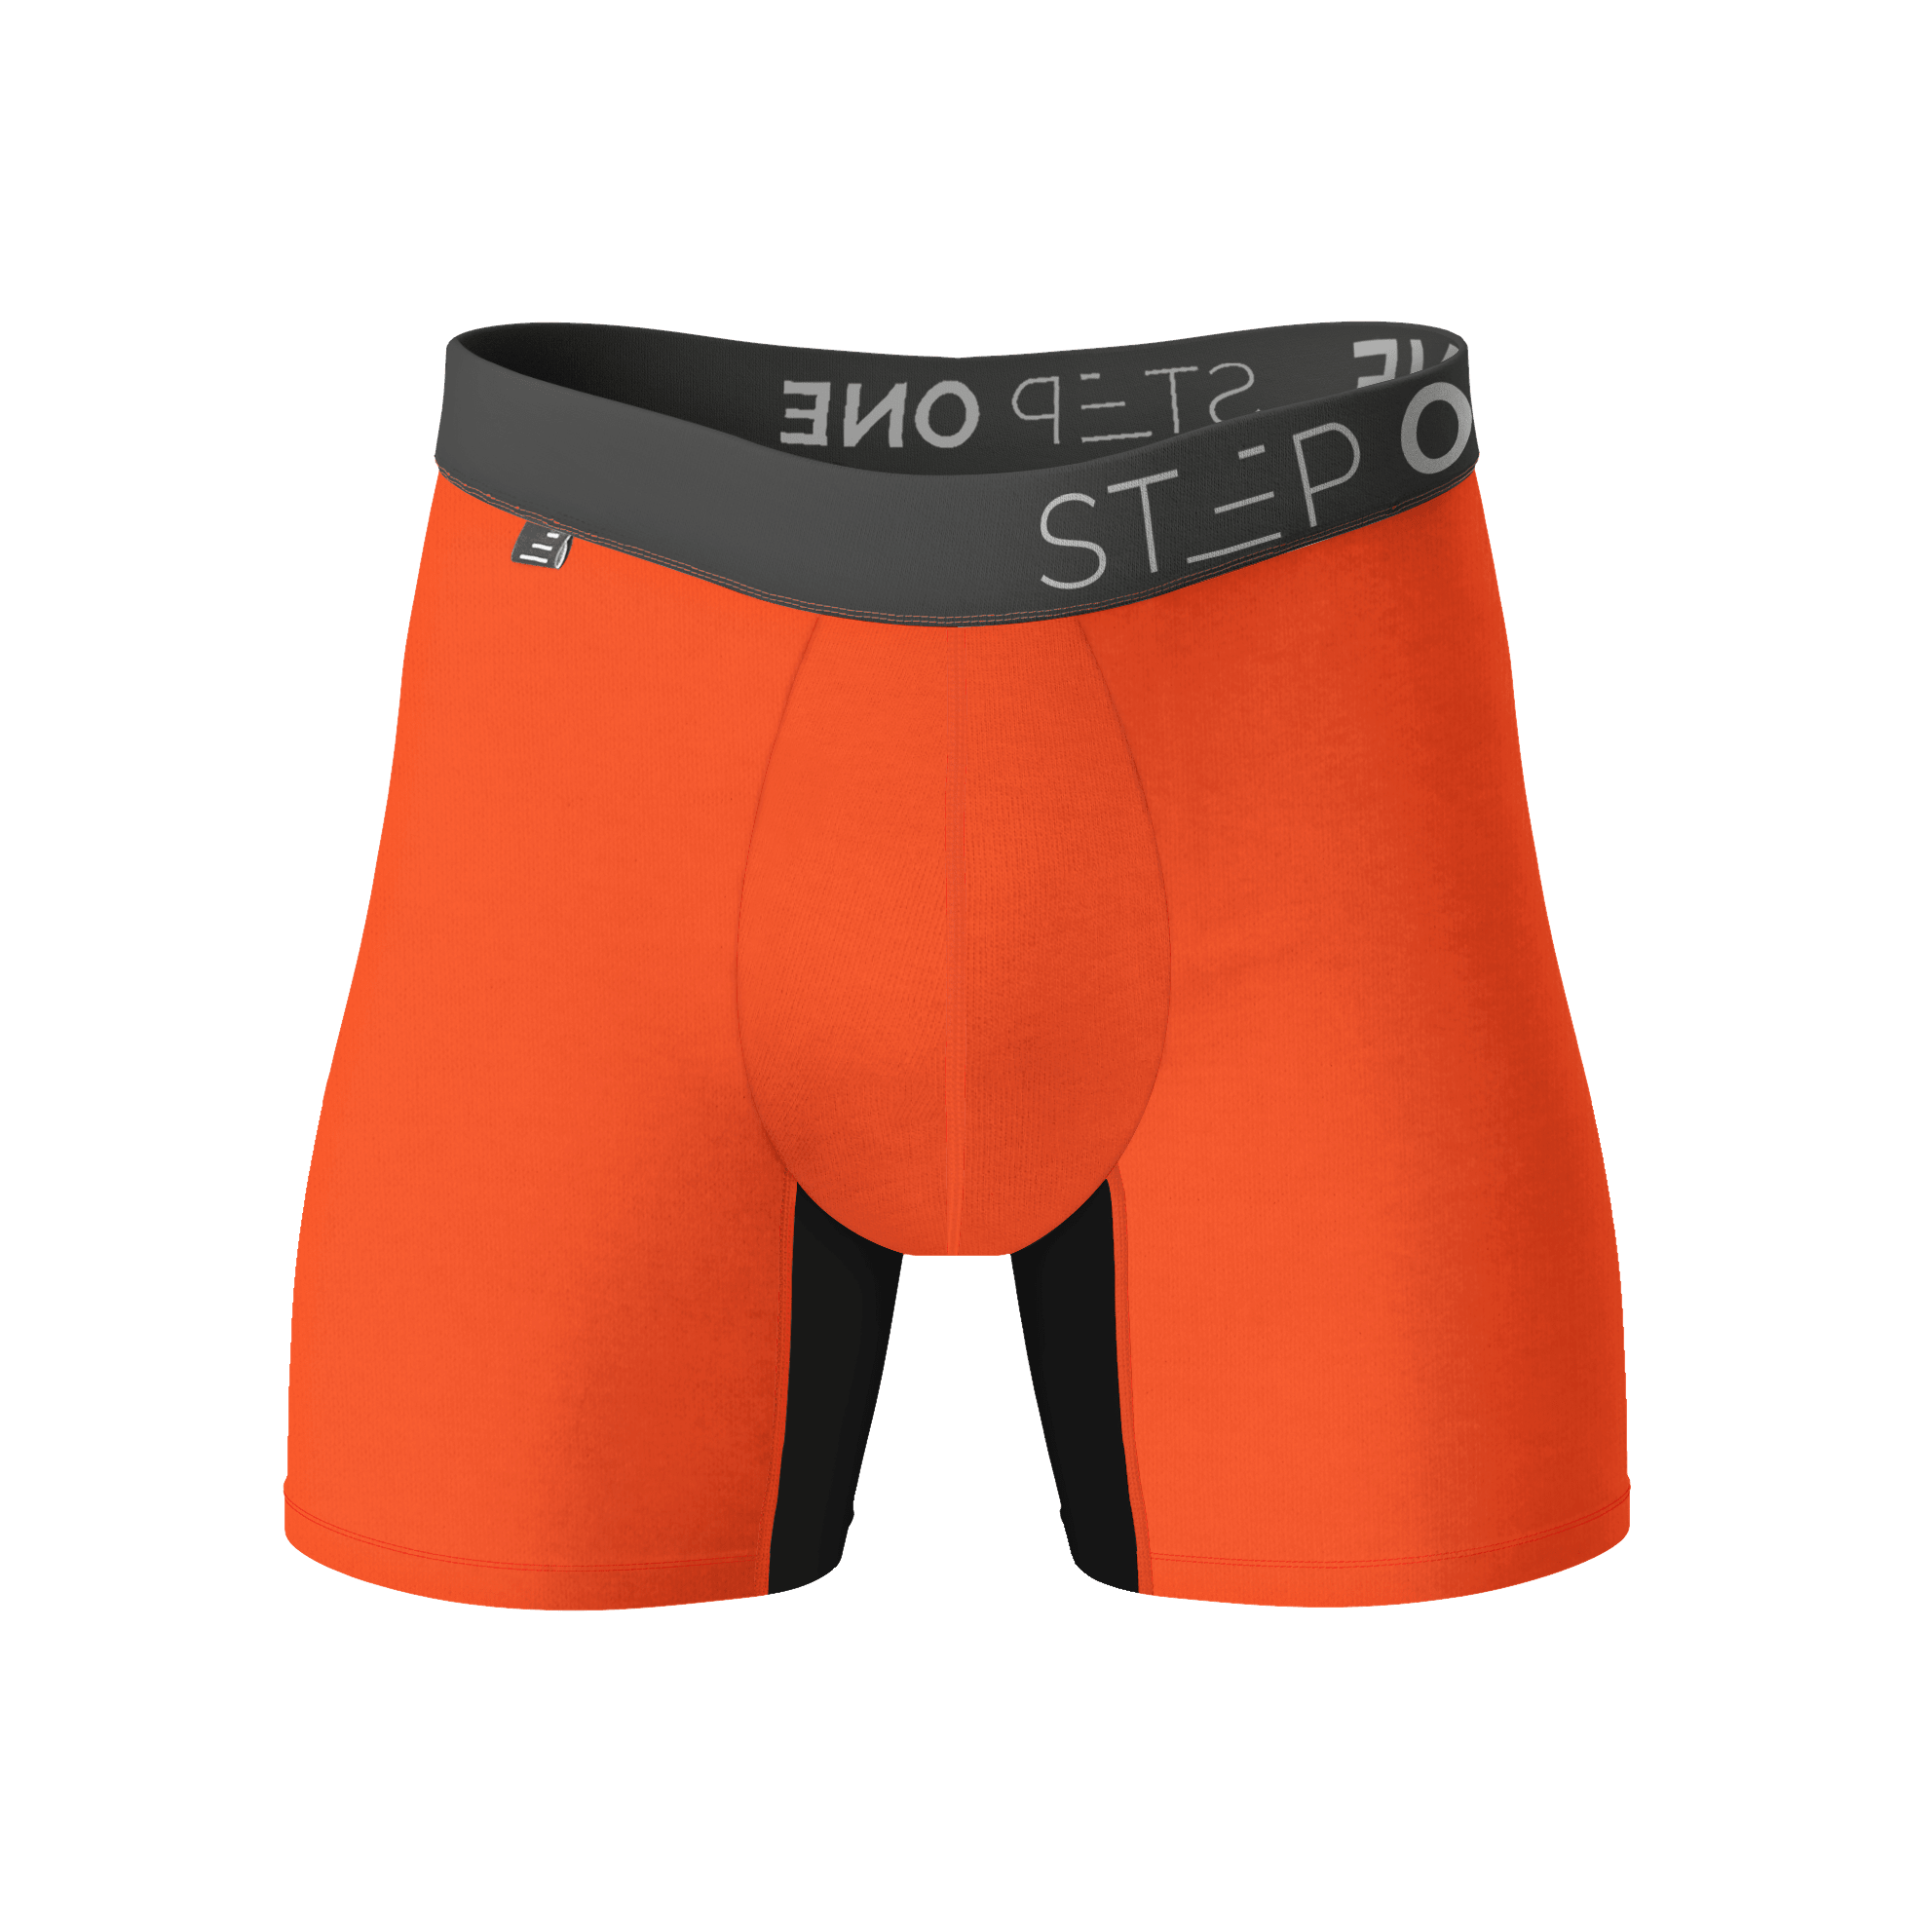 Boxer Brief - Butter Nuts  Step One Men's Bamboo Underwear